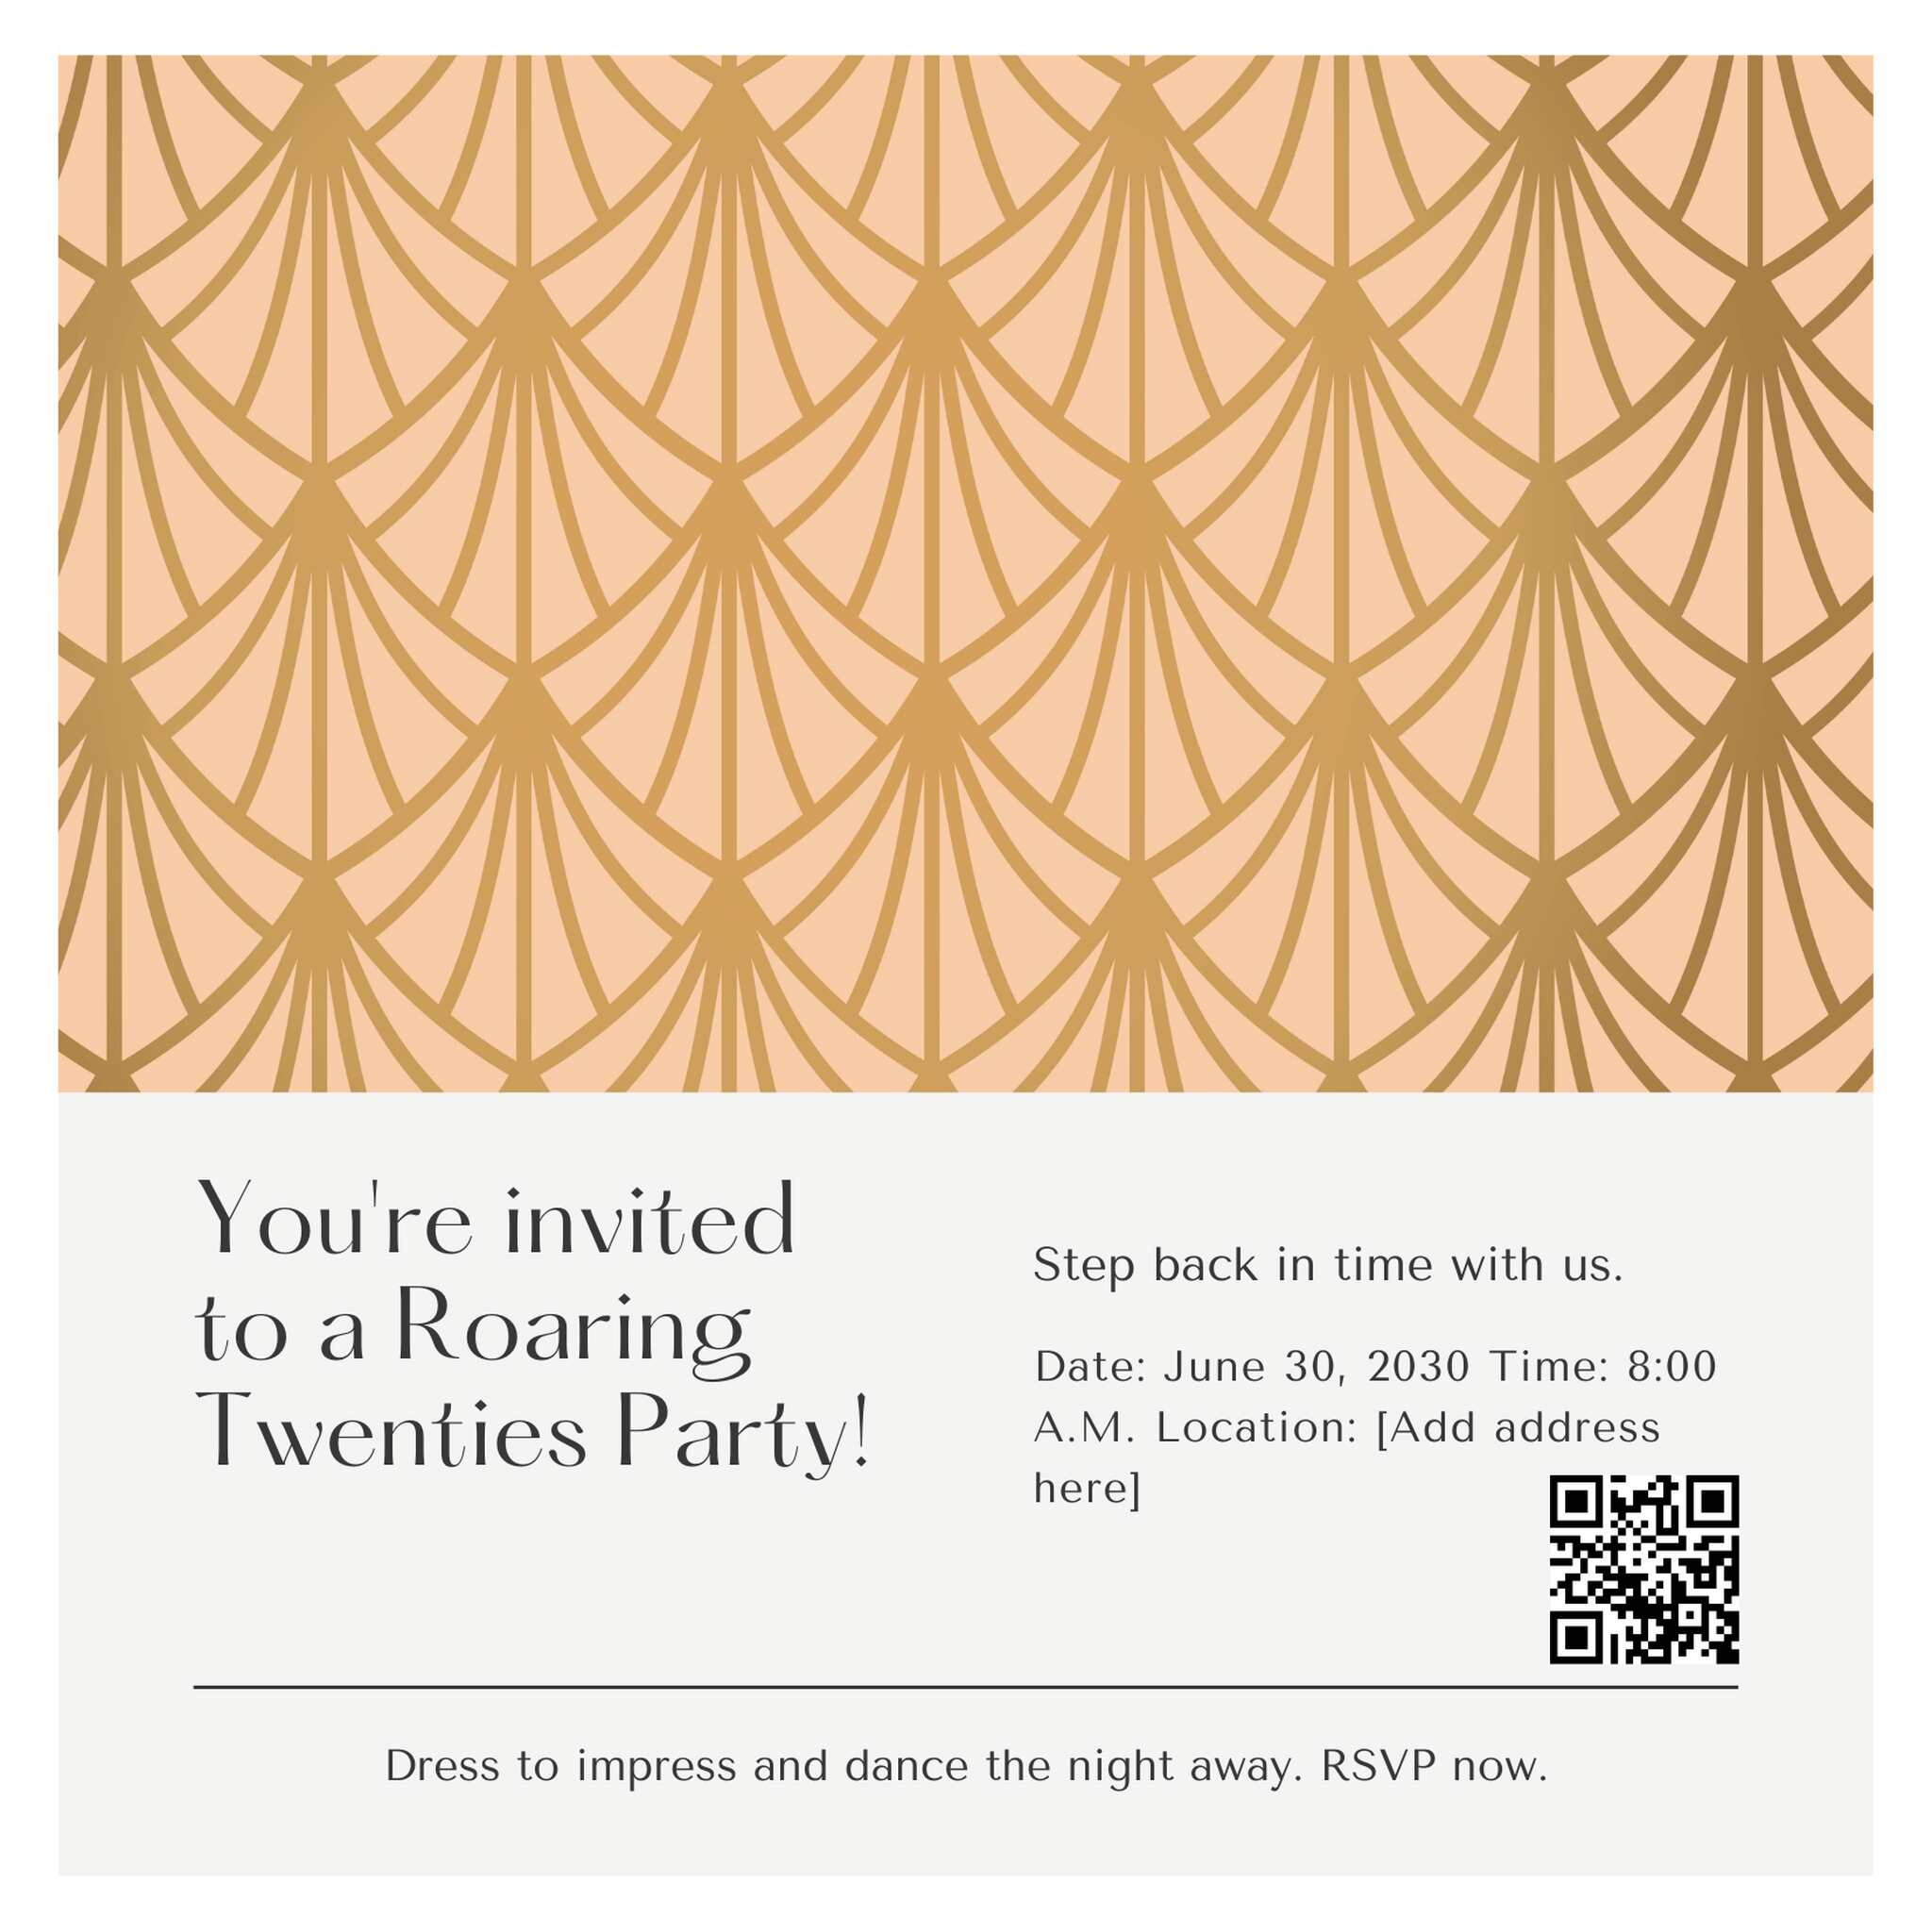 roaring twenties inspired party invitation template with a QR code